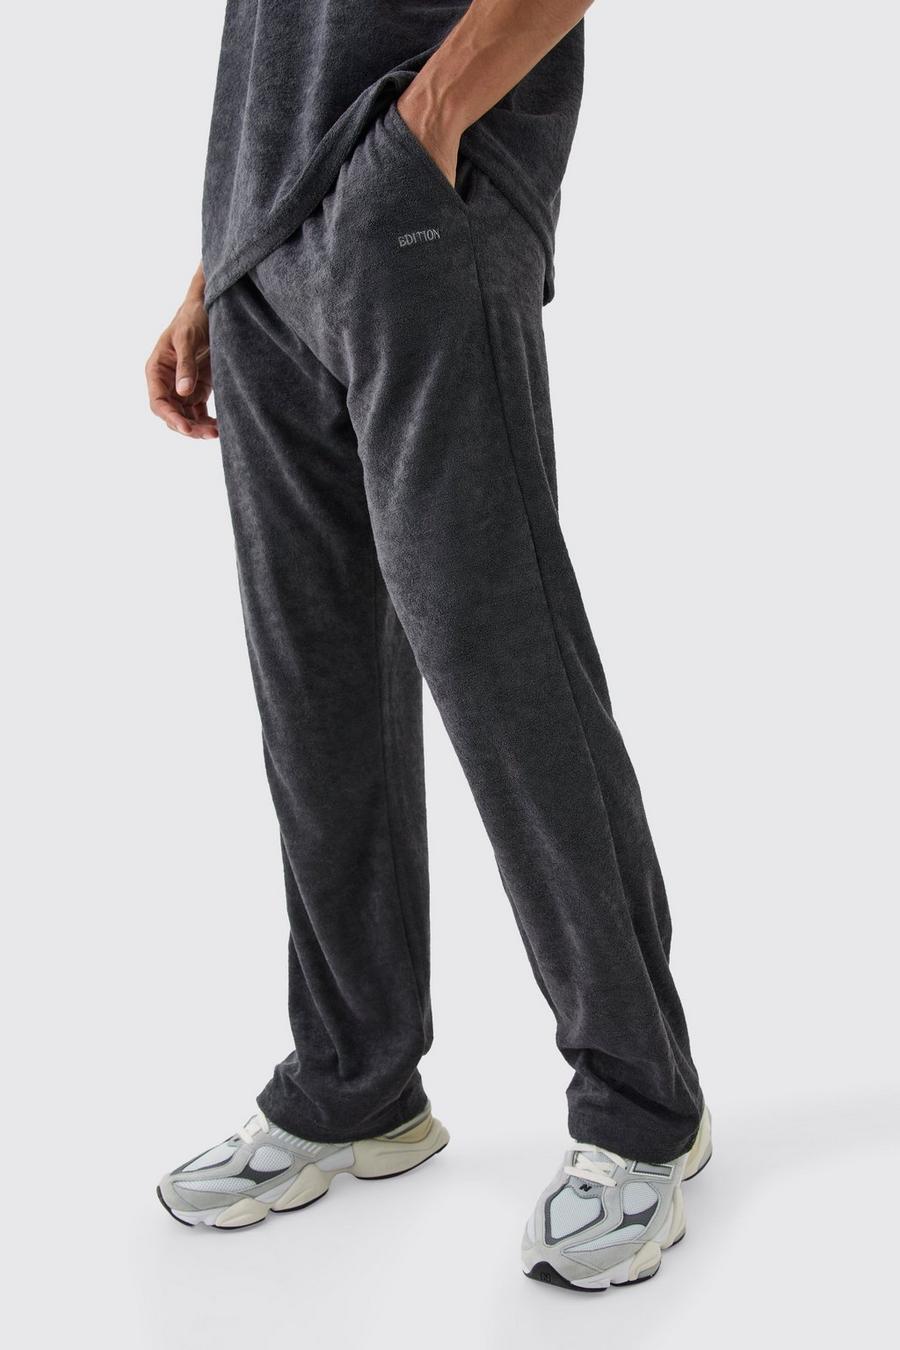 Lockere Edition Frottee-Jogginghose, Charcoal